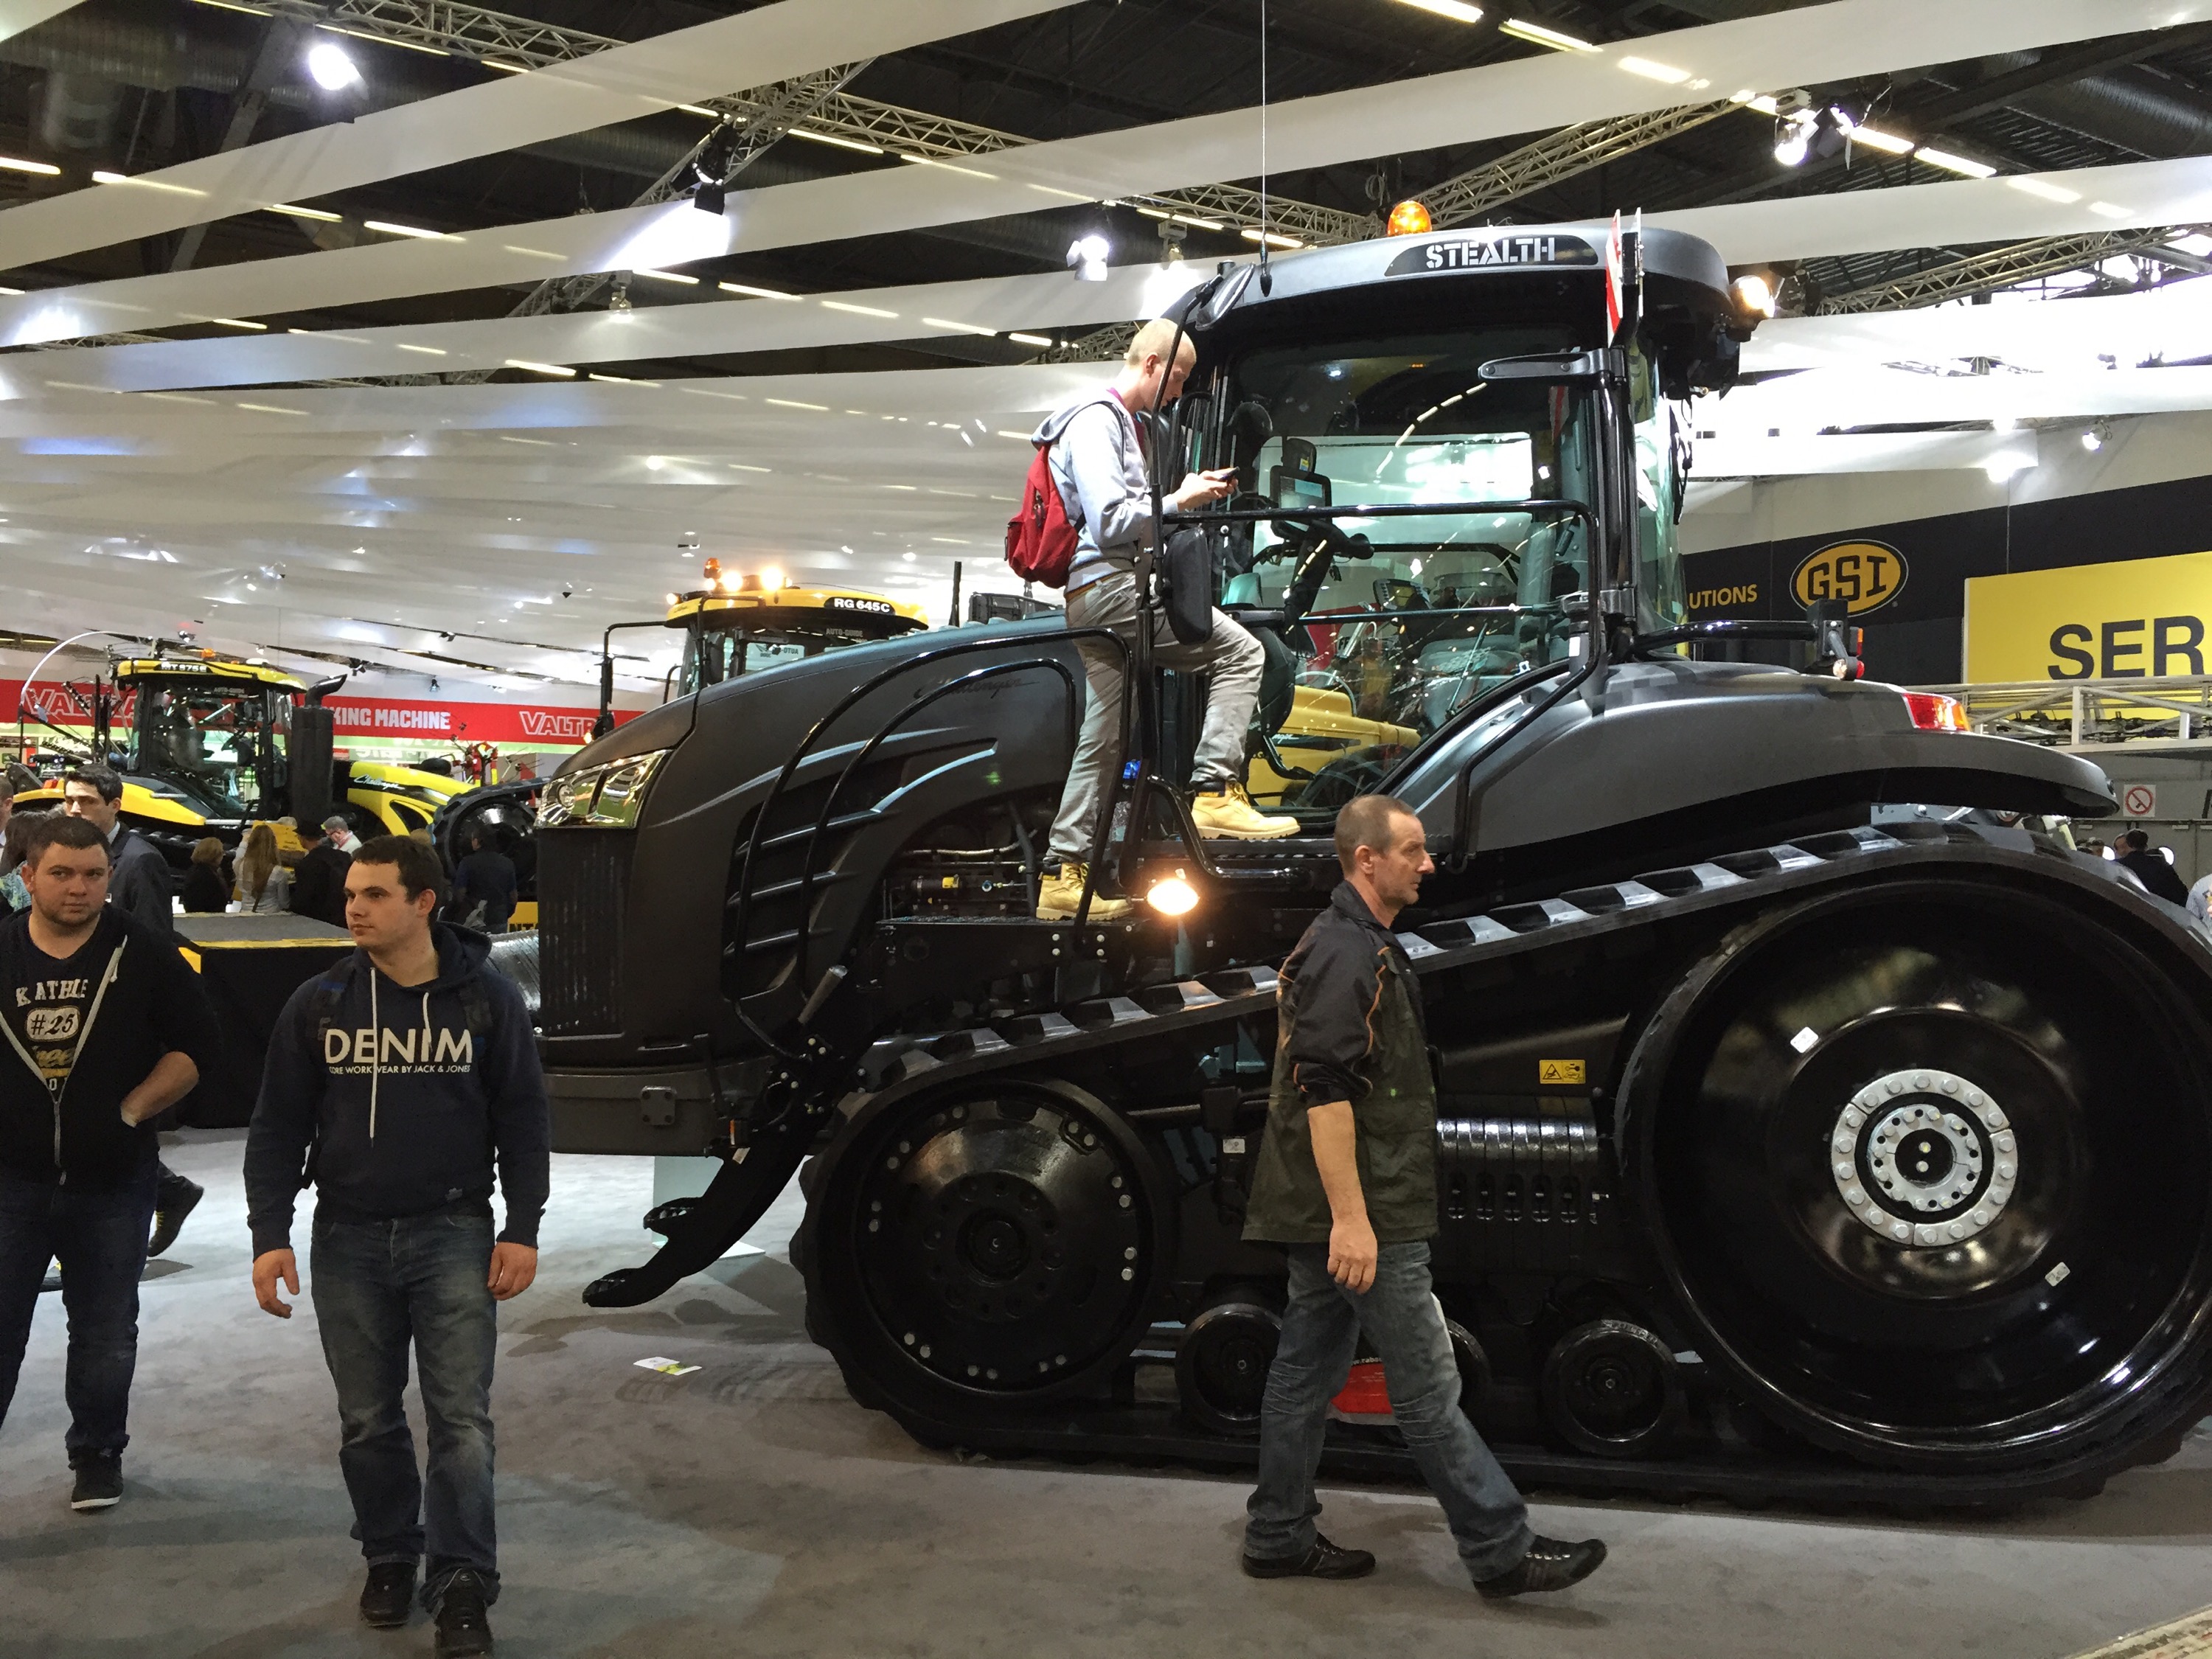 Slealth Challenger at SIMA Show